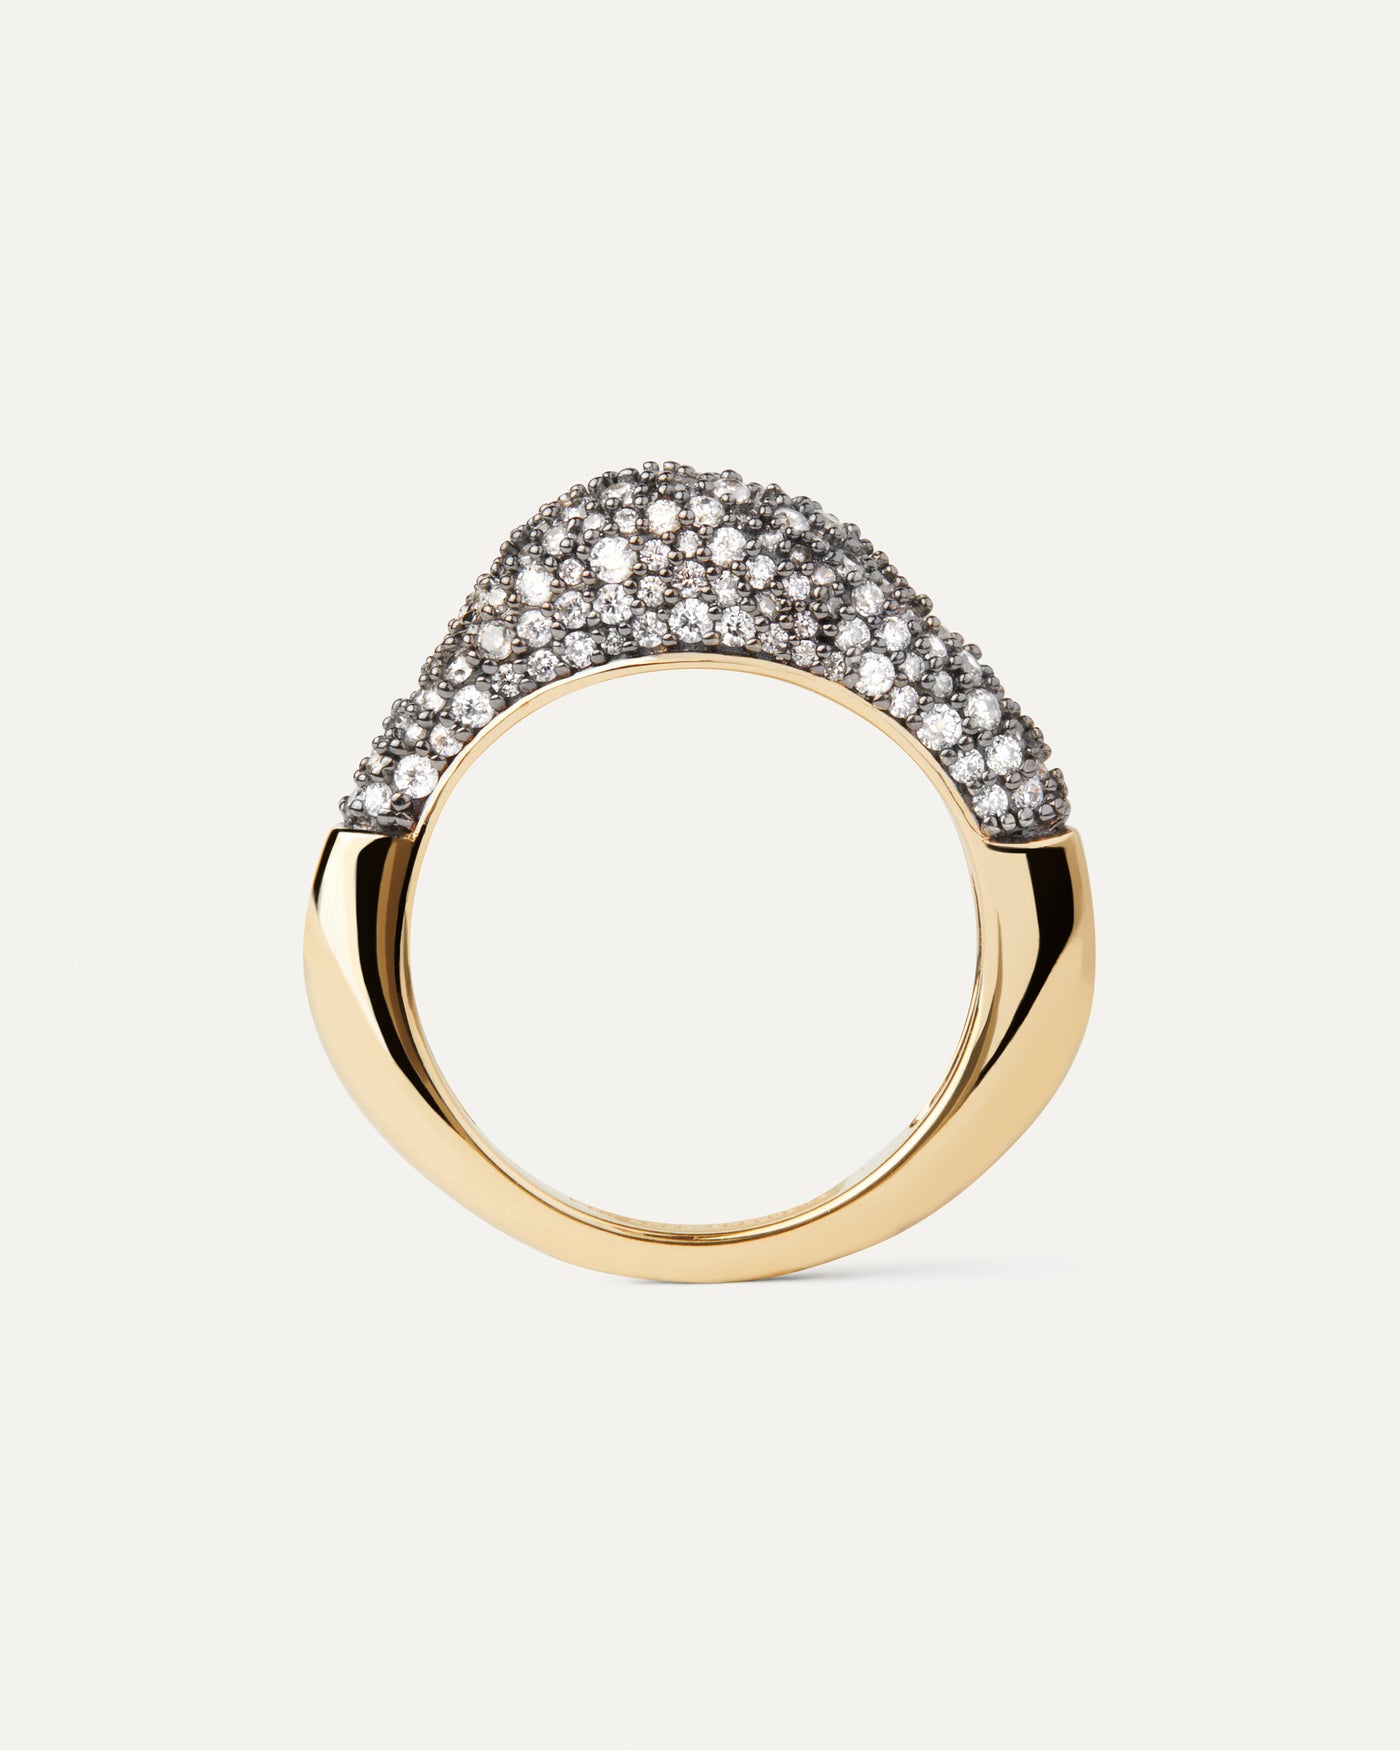 2023 Selection | Pavé Duna Ring. Gold-plated organic shape stacking ring set with cubic zirconia pavé. Get the latest arrival from PDPAOLA. Place your order safely and get this Best Seller. Free Shipping.